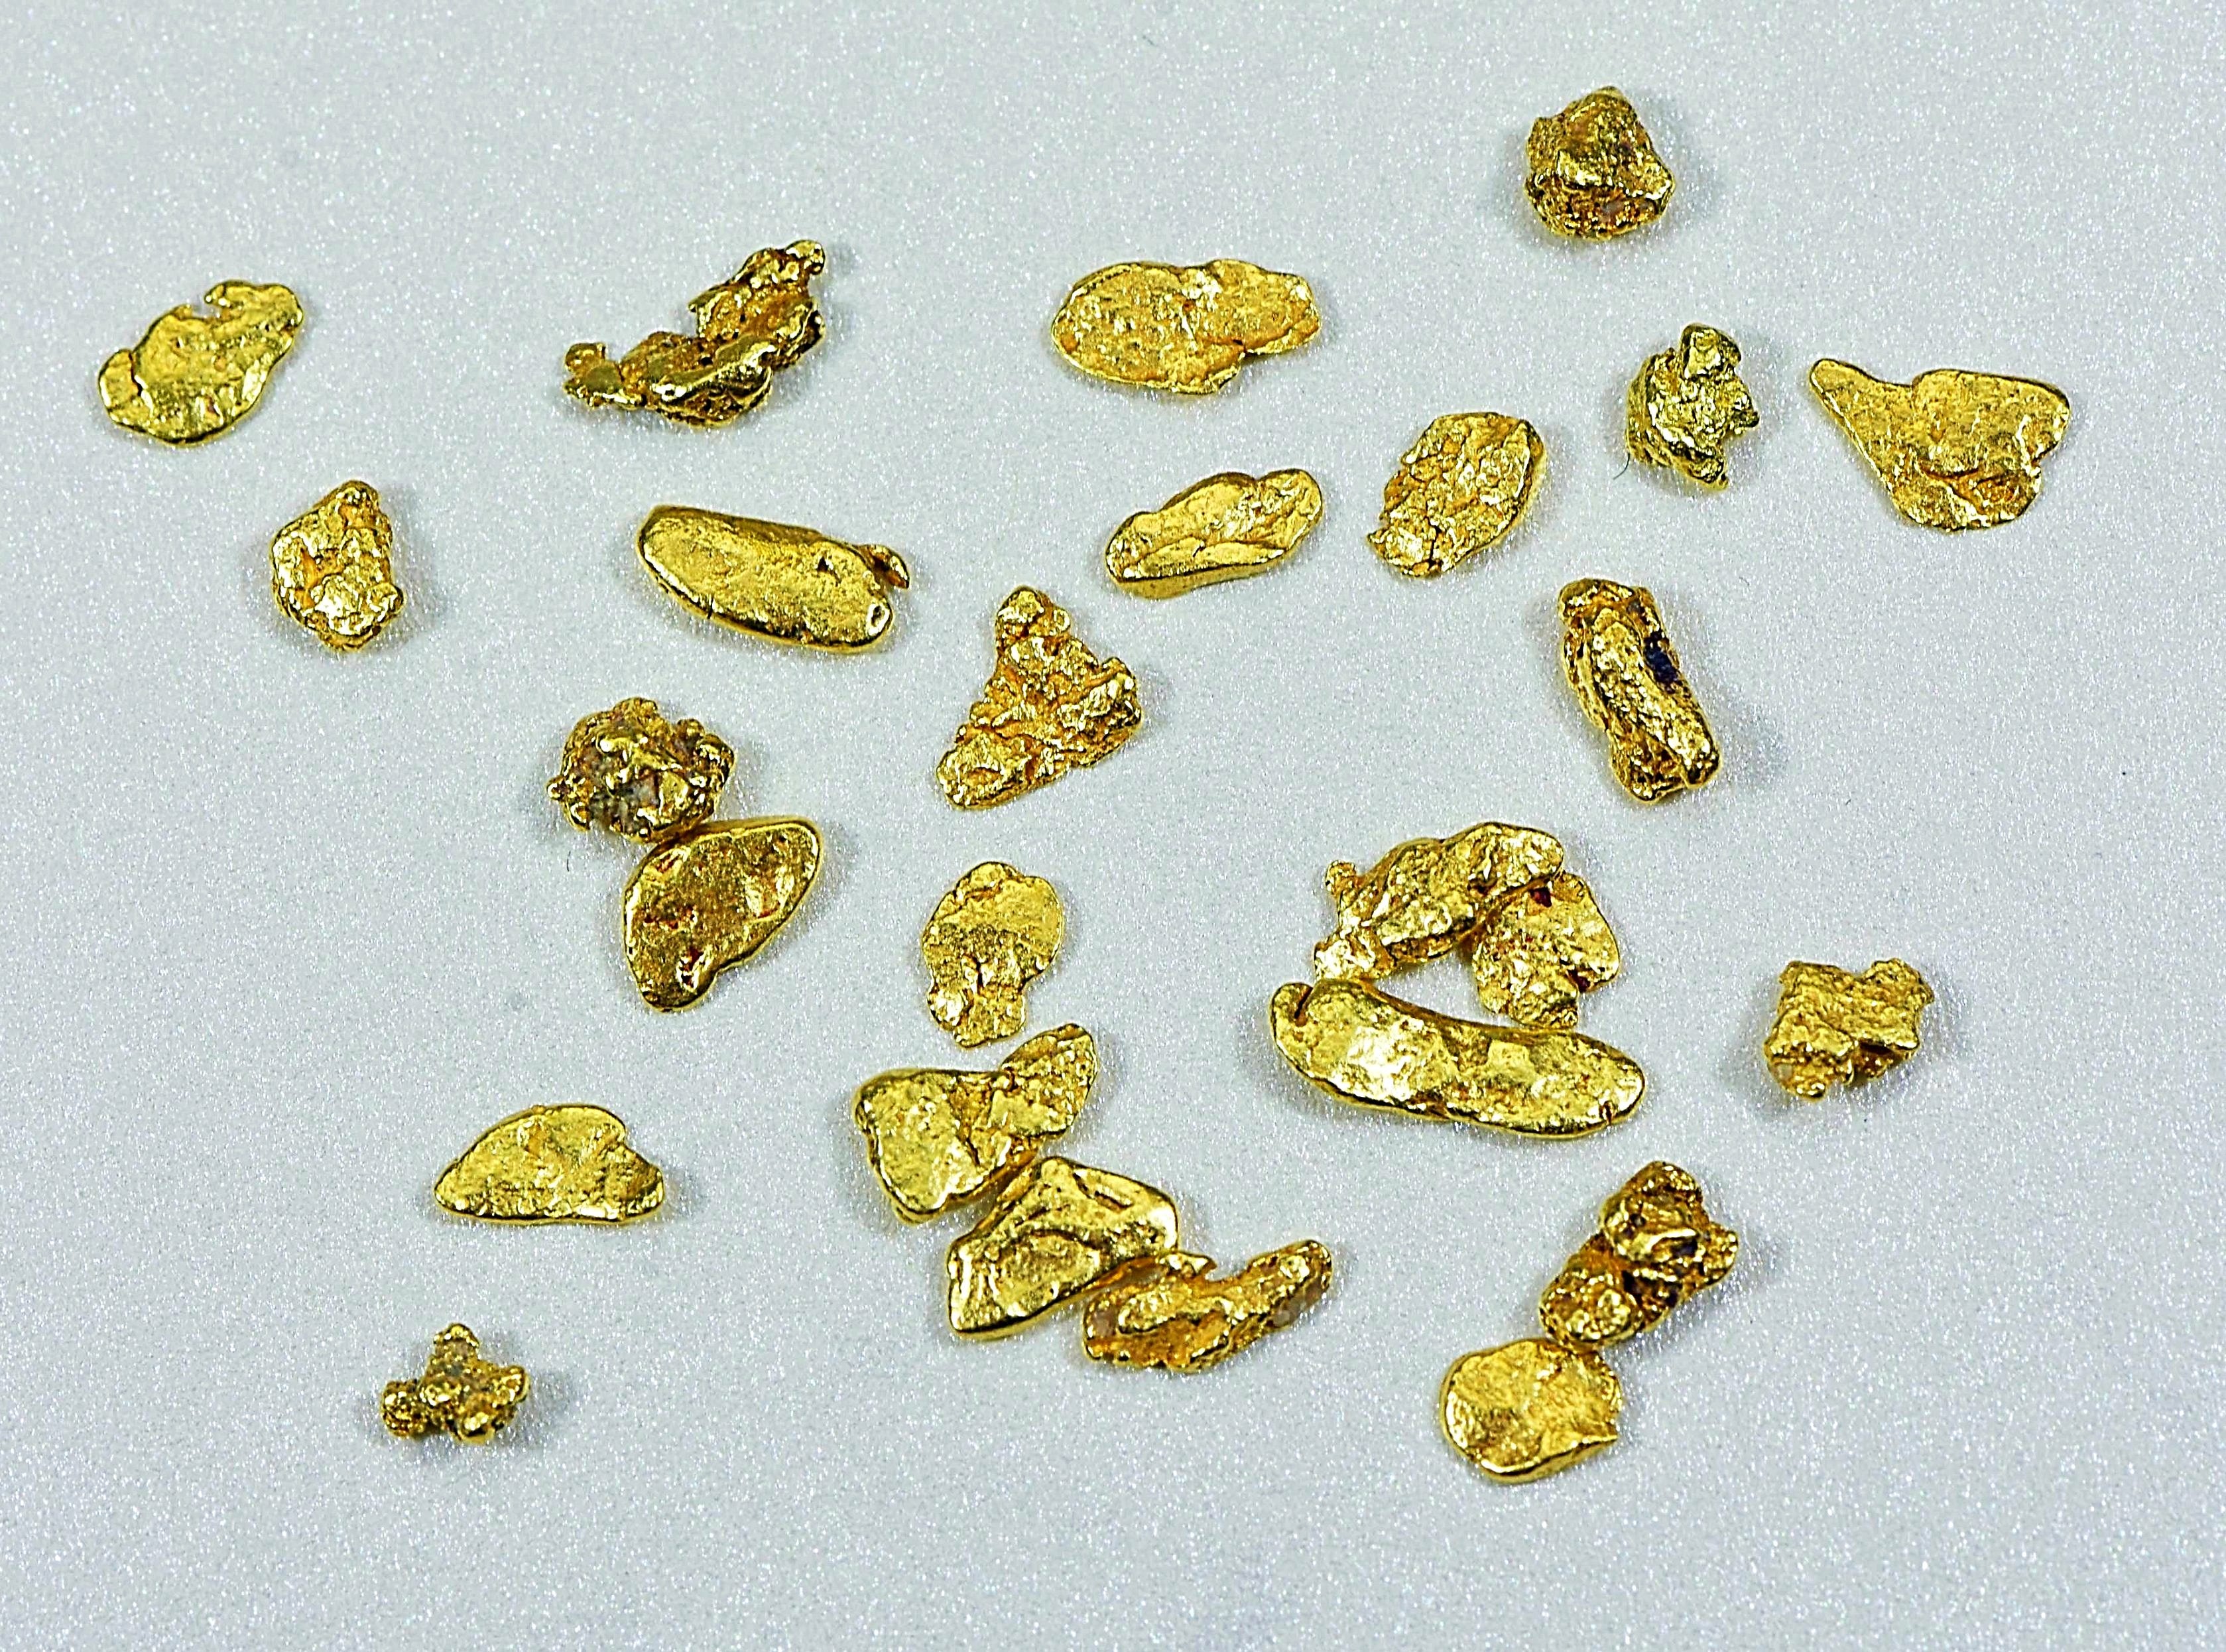 California Gold Nuggets 5 Grams of #8 Mesh Gold Authentic Natural Flakes